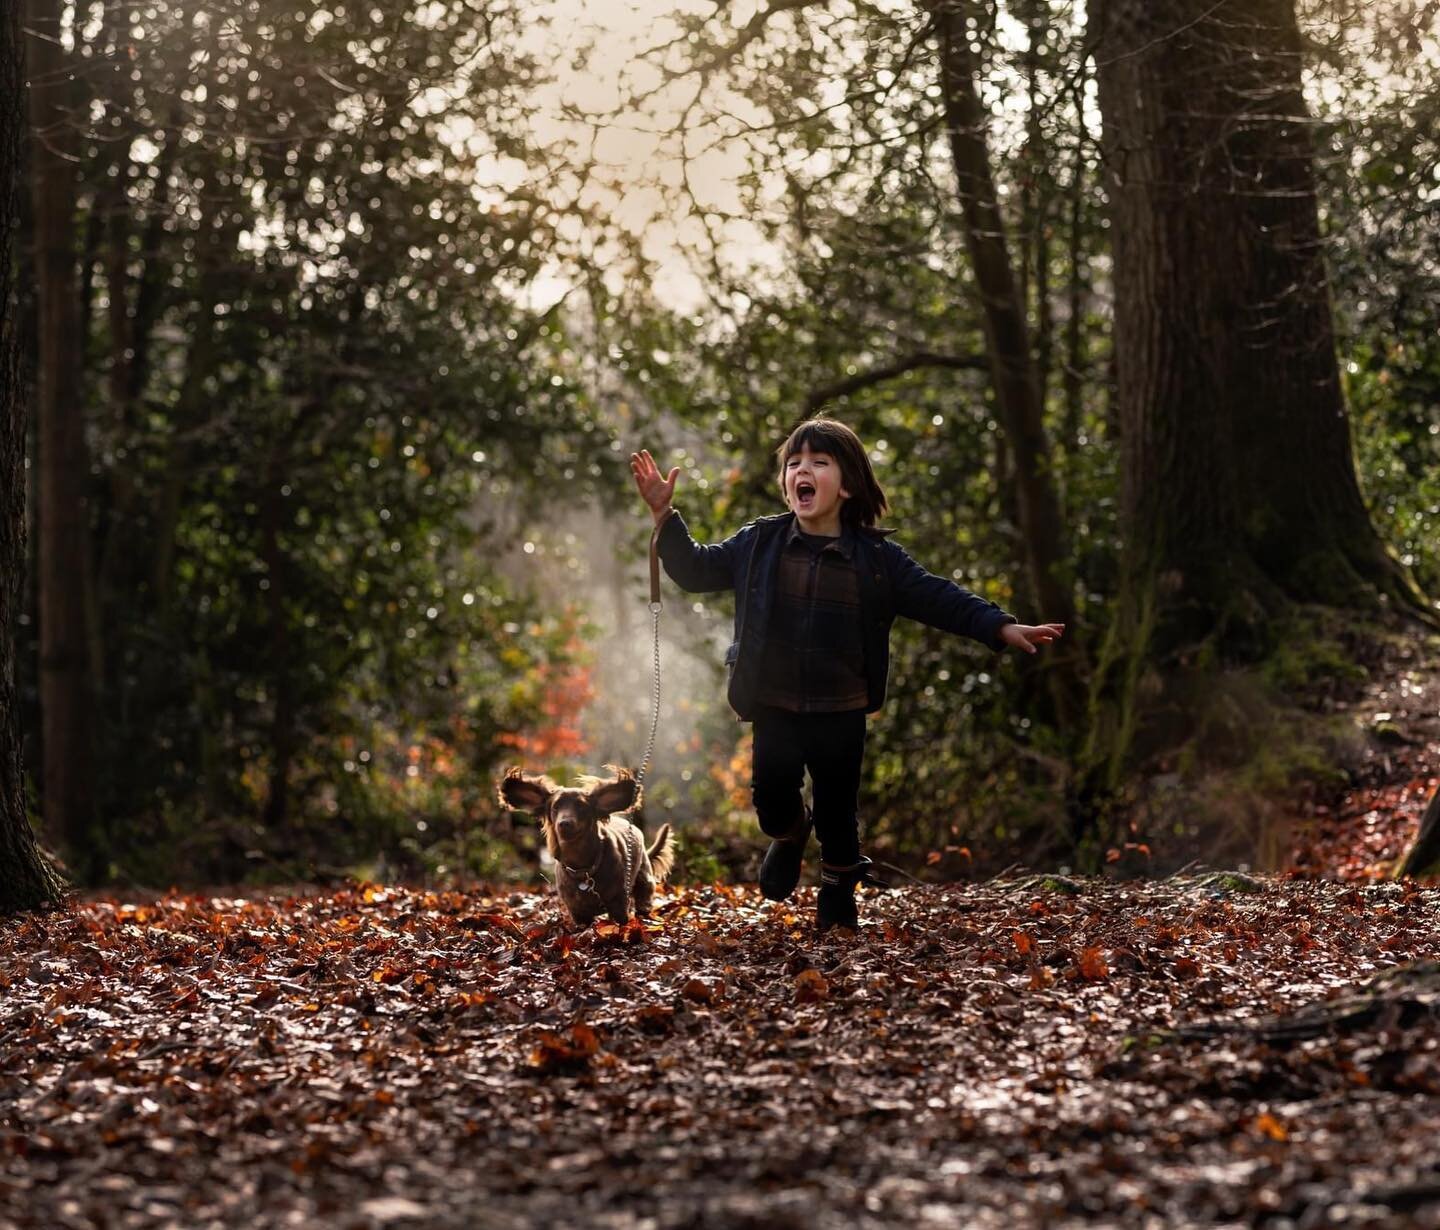 It&rsquo;s still looking Autumnal out there.  Love this little bit of joy.
#childrenphotography #familyphotography #mortimer #charlottecarterphotography #letthembelittle